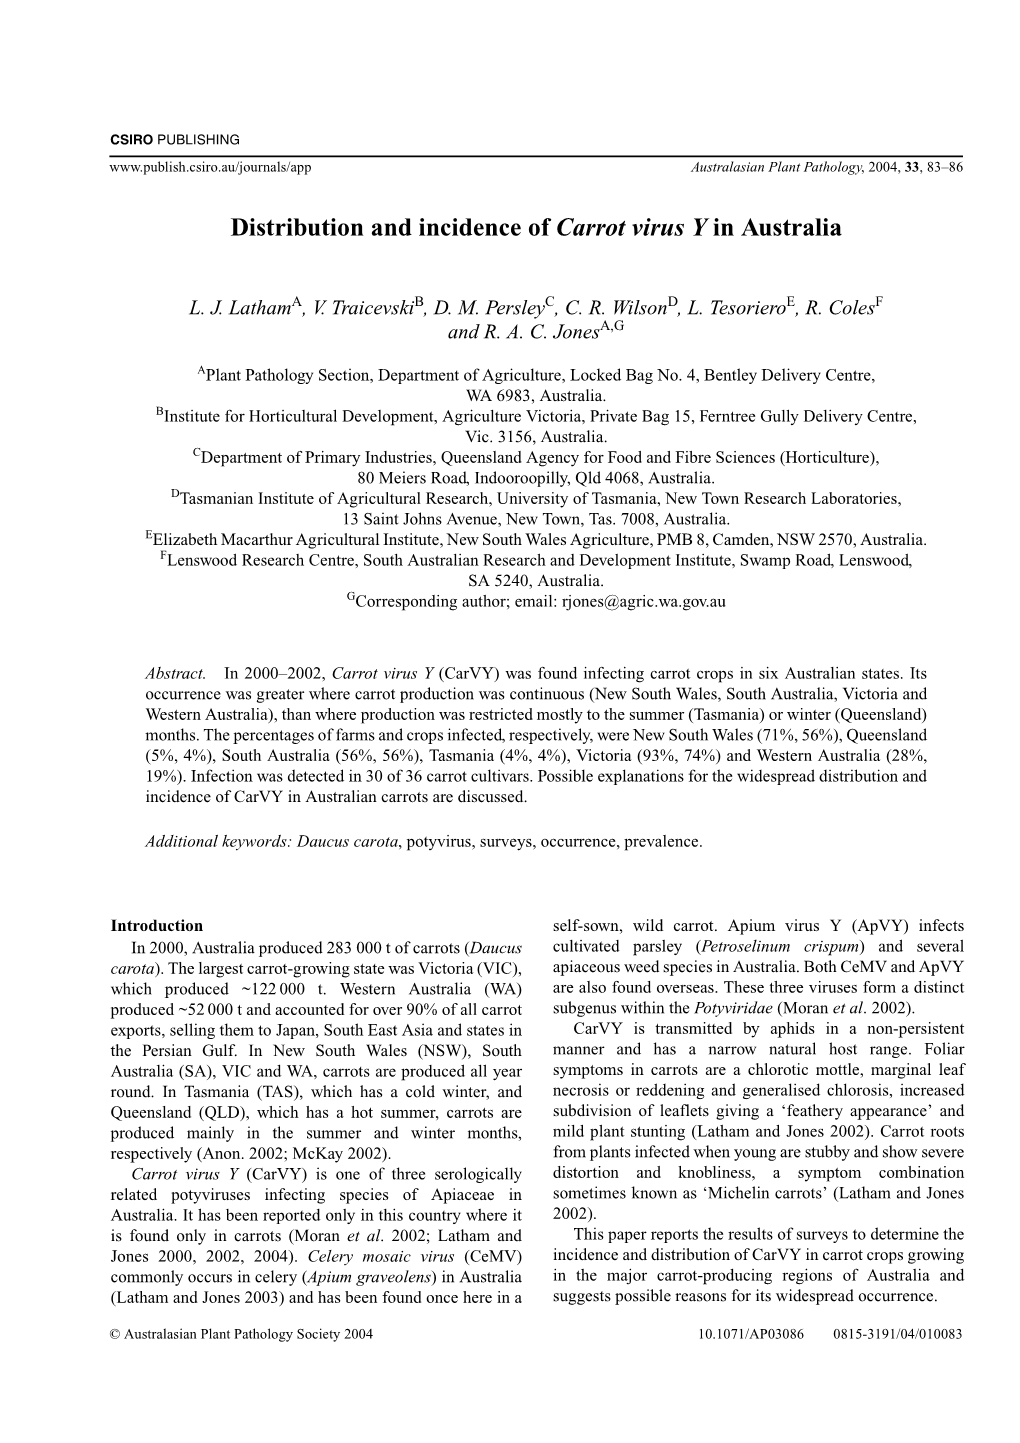 Distribution and Incidence of Carrot Virus Y in Australia